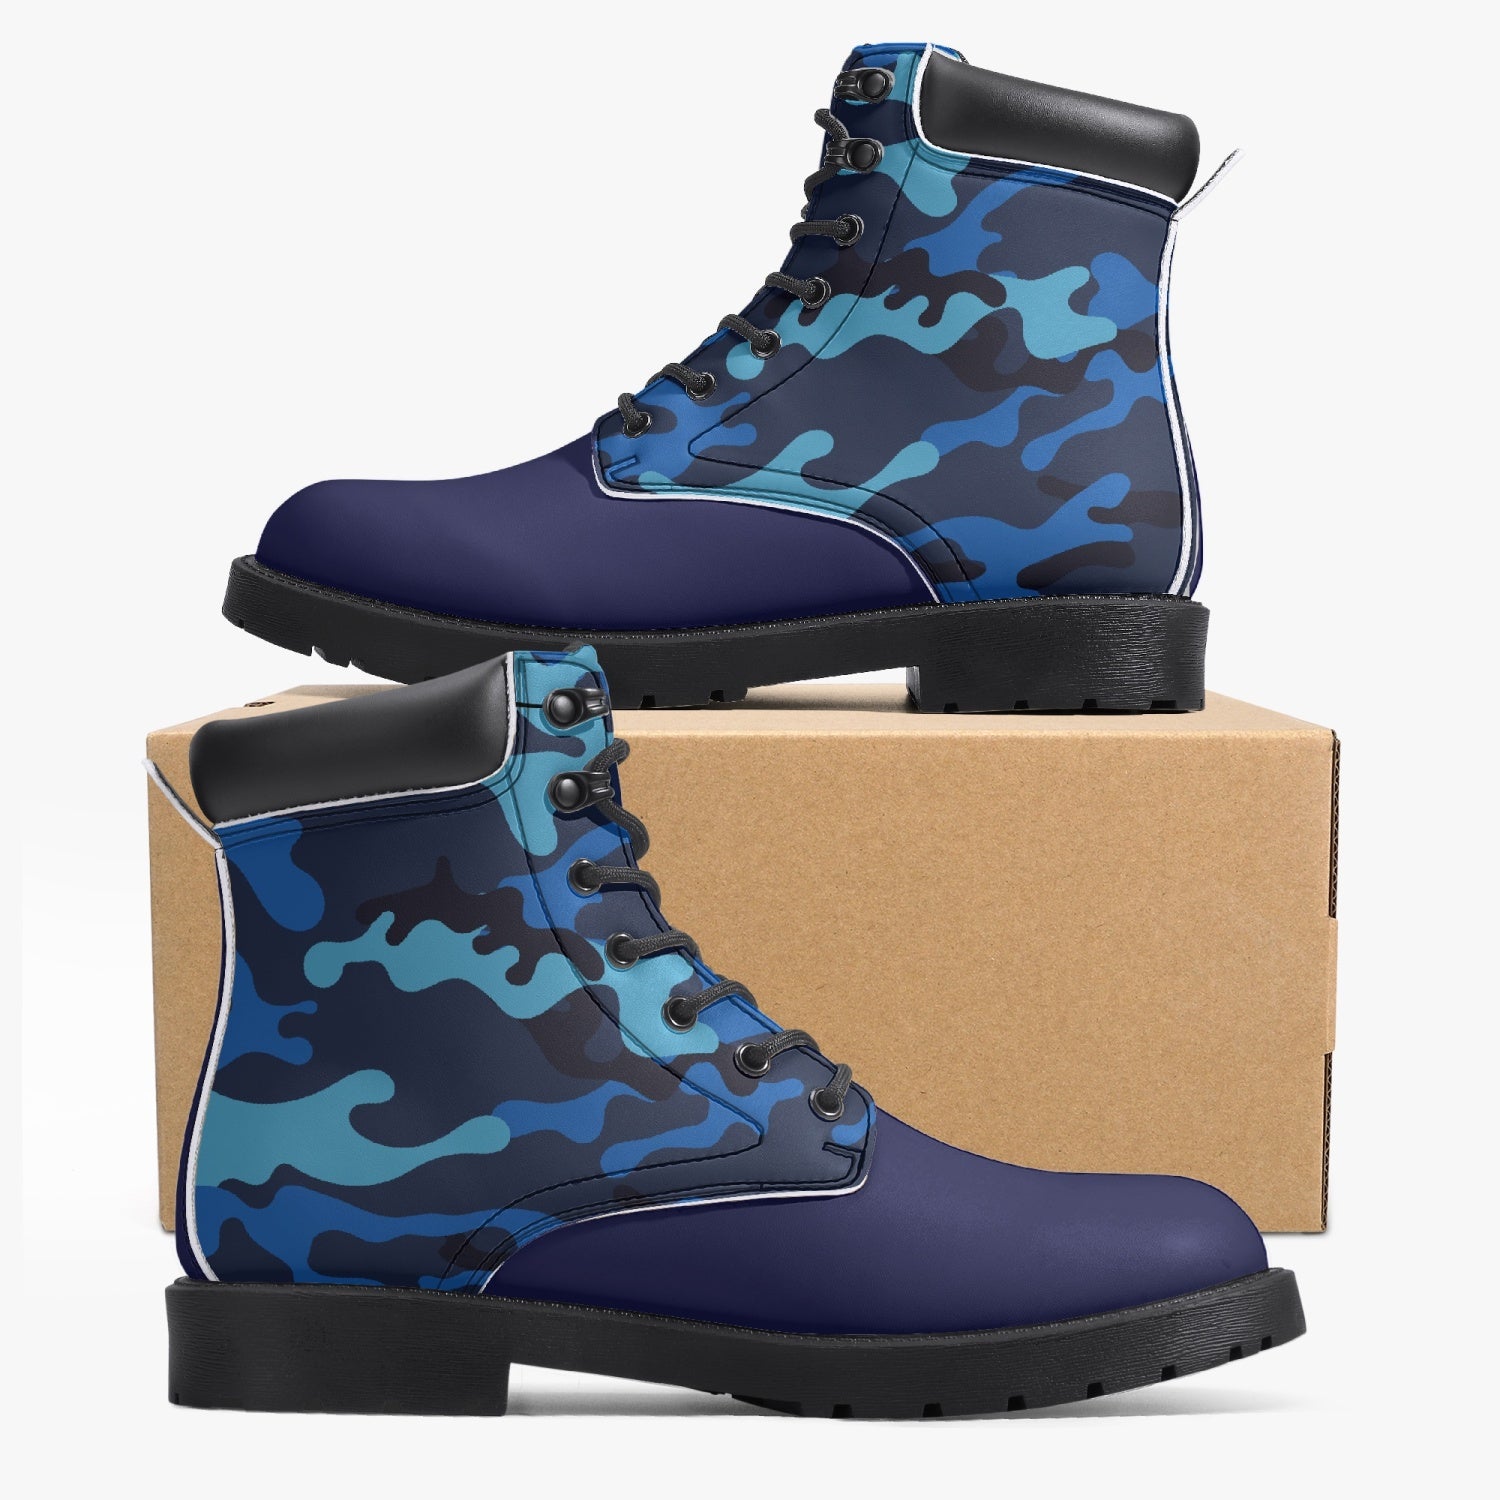 Casual Leather Boots - Navy/Camo